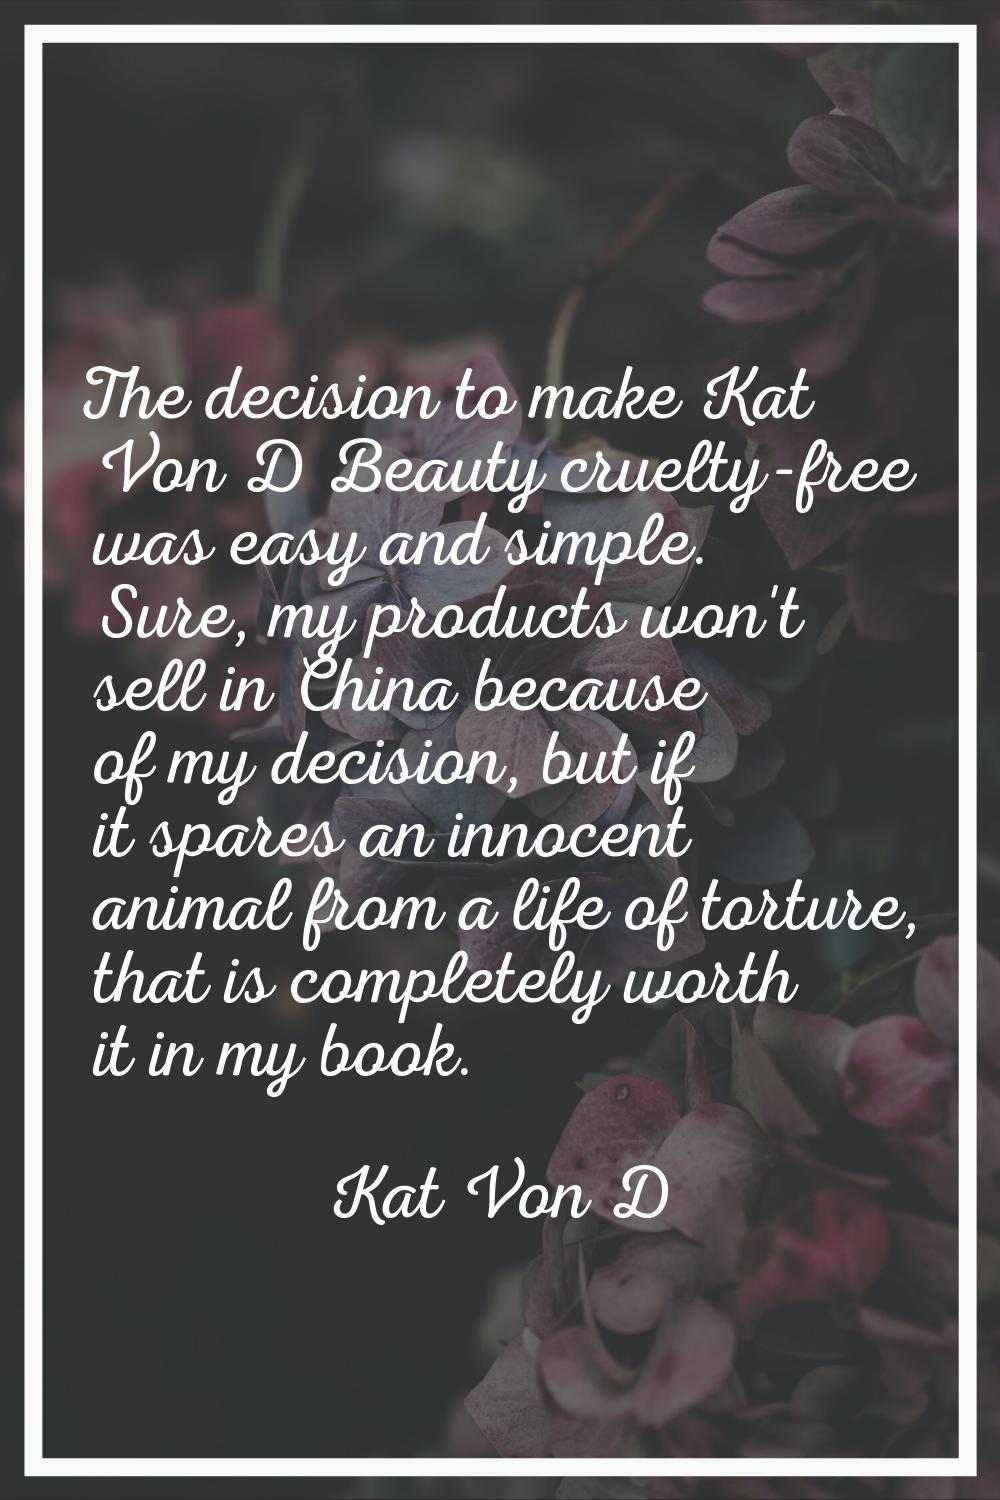 The decision to make Kat Von D Beauty cruelty-free was easy and simple. Sure, my products won't sel